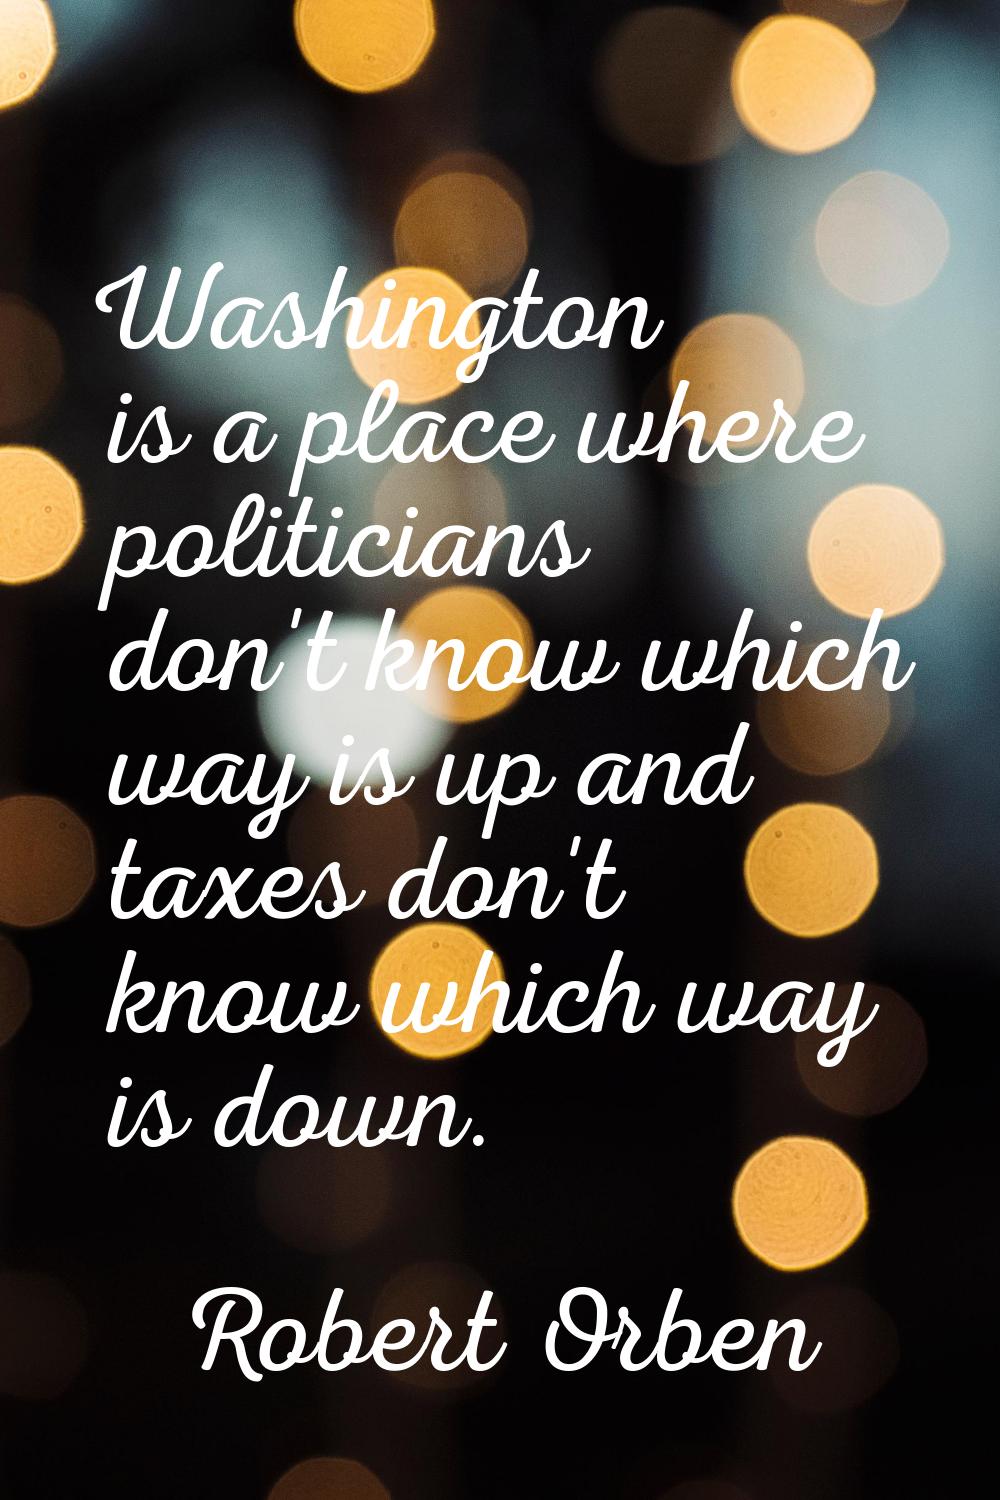 Washington is a place where politicians don't know which way is up and taxes don't know which way i